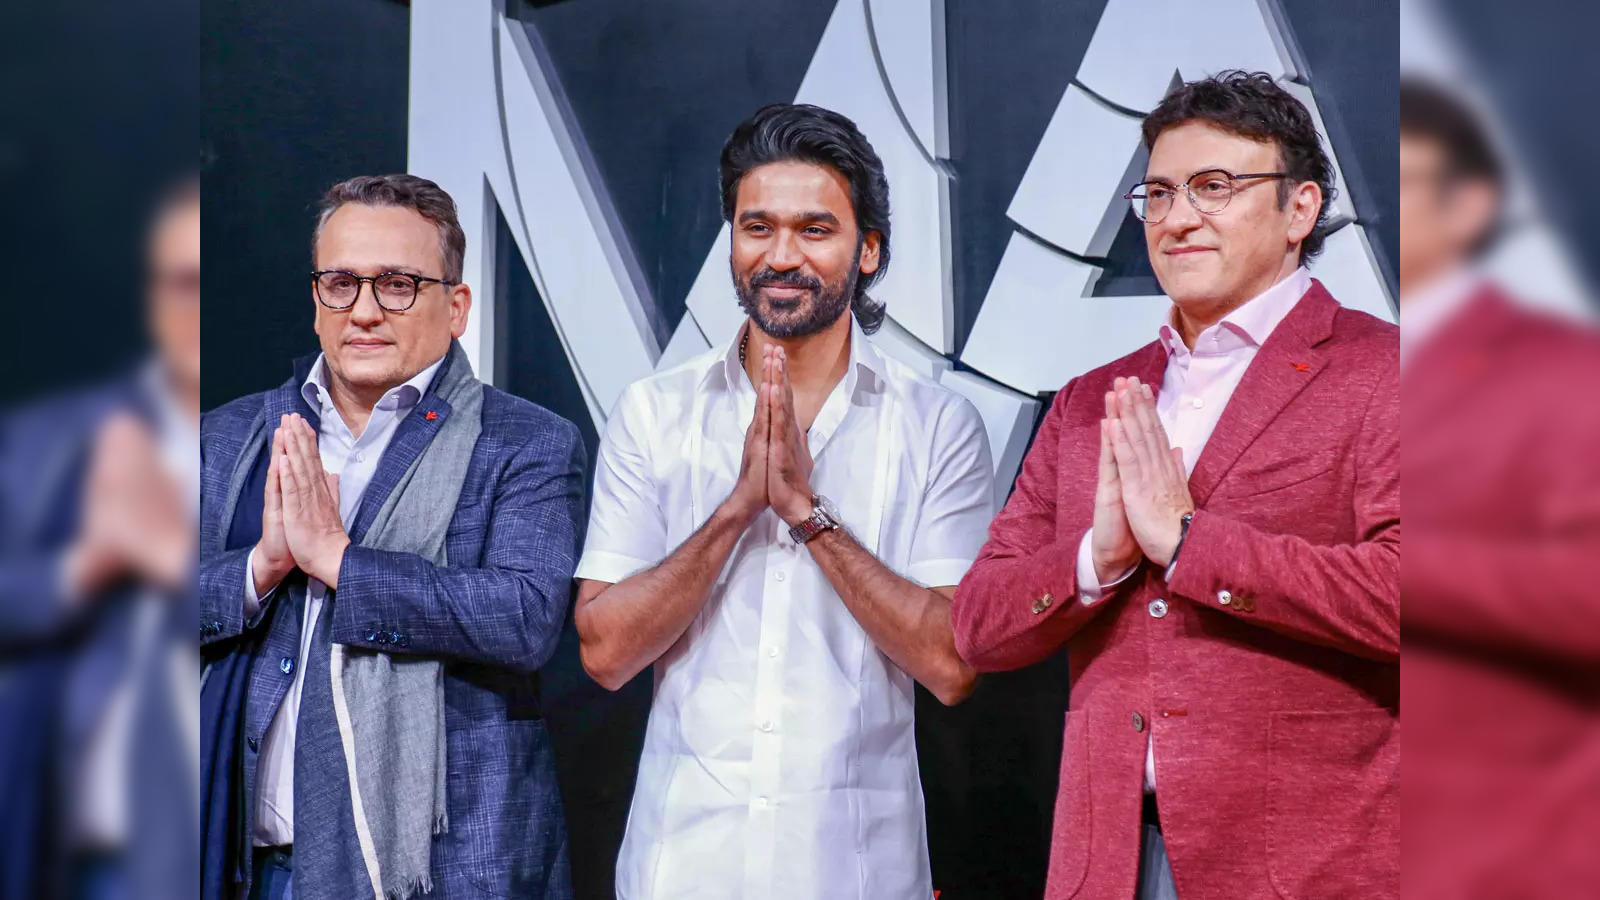 CE at The Gray Man premiere - Russo Brothers: We hope to do more work with  Dhanush- Cinema express